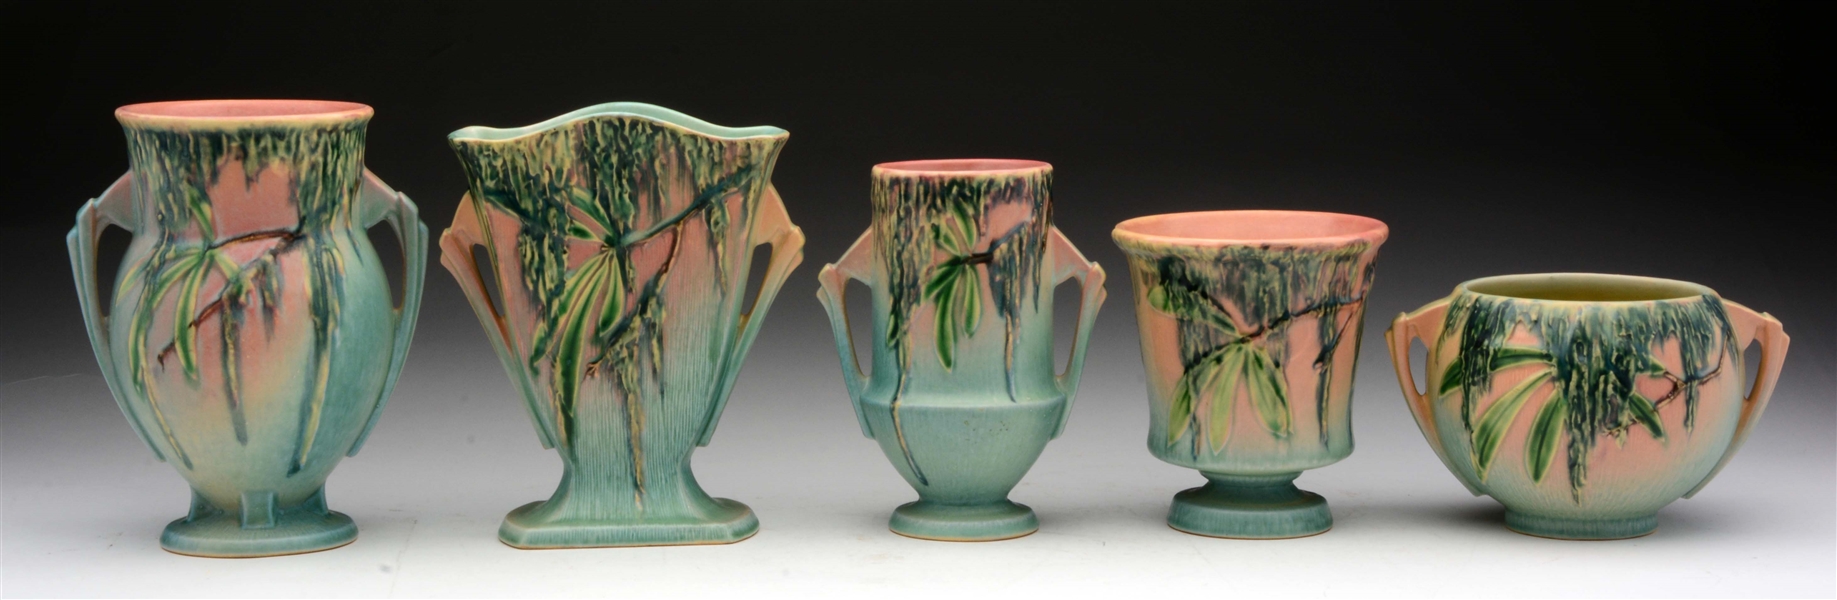 LOT OF 5: MOSS VASES. 